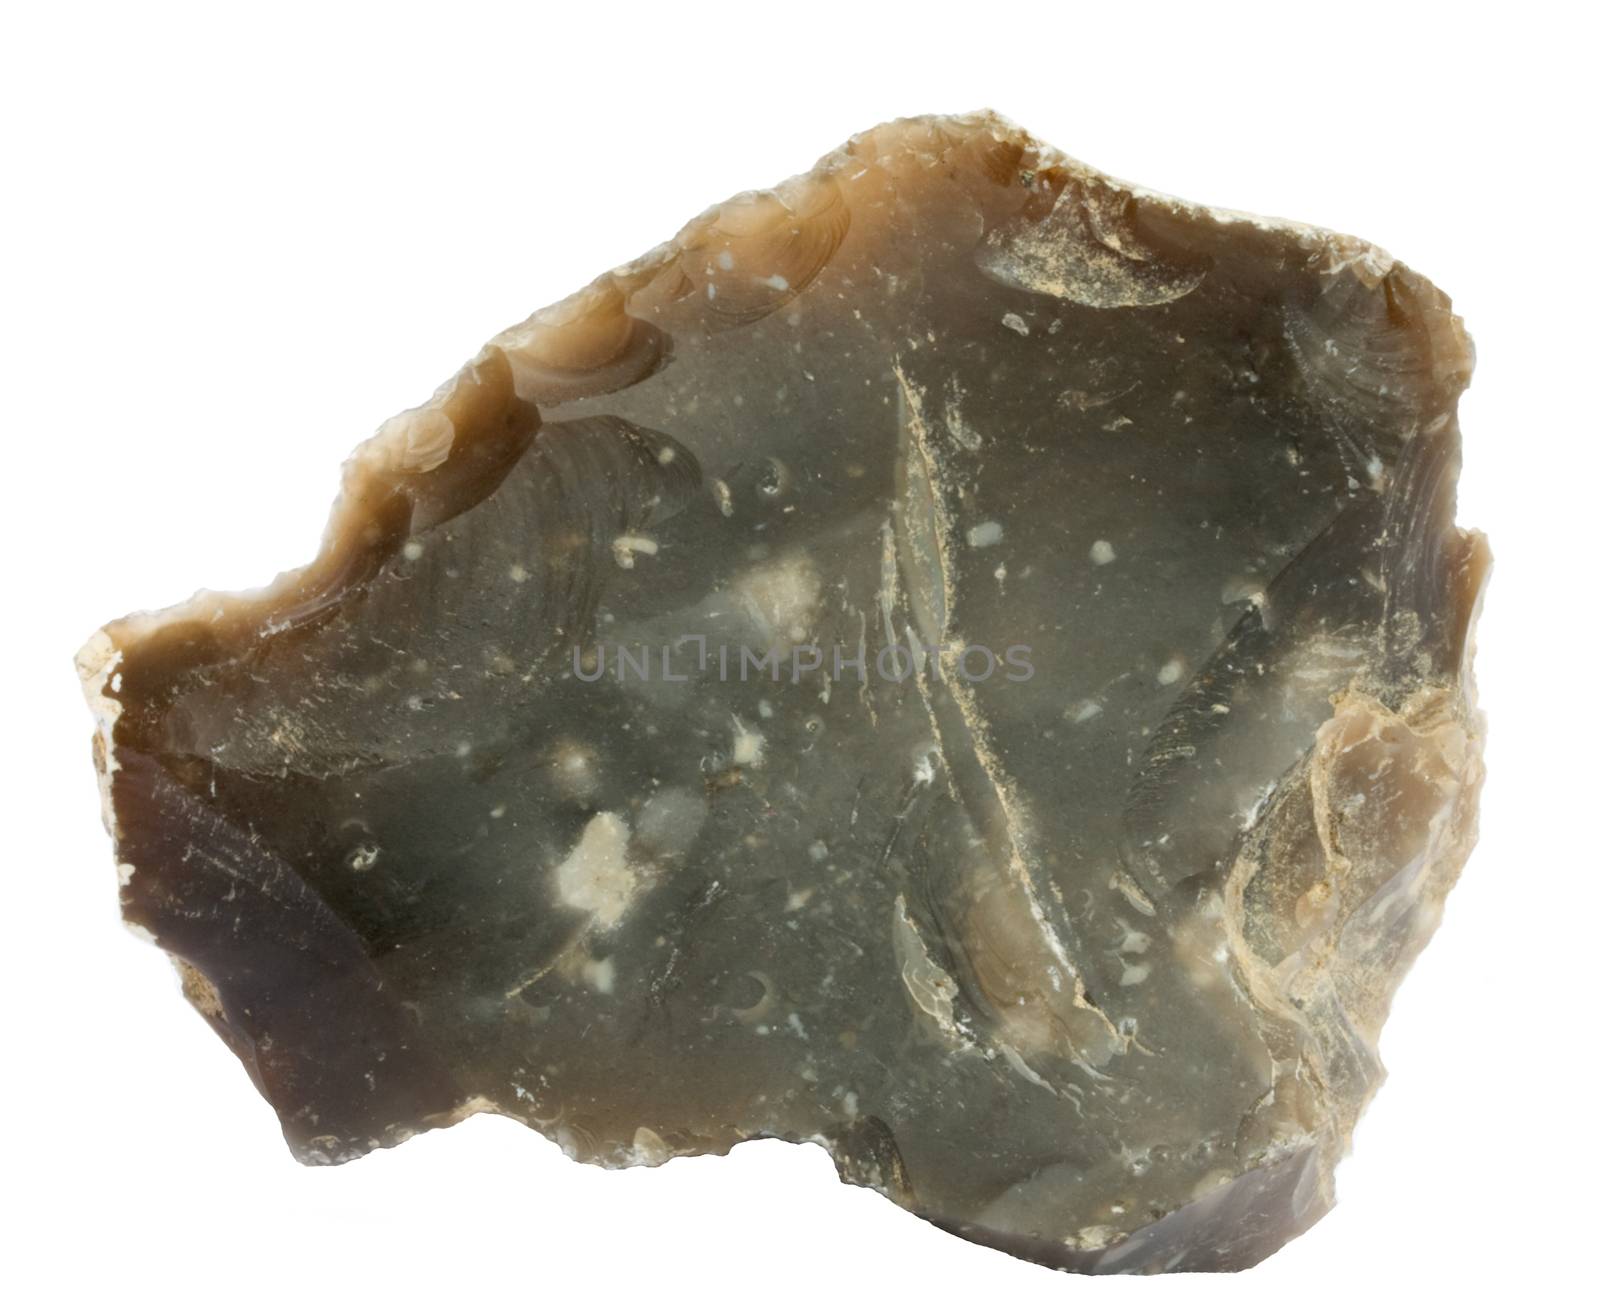 Single flake of flint showing the typical sharp edge that was used for cutting in the stone age